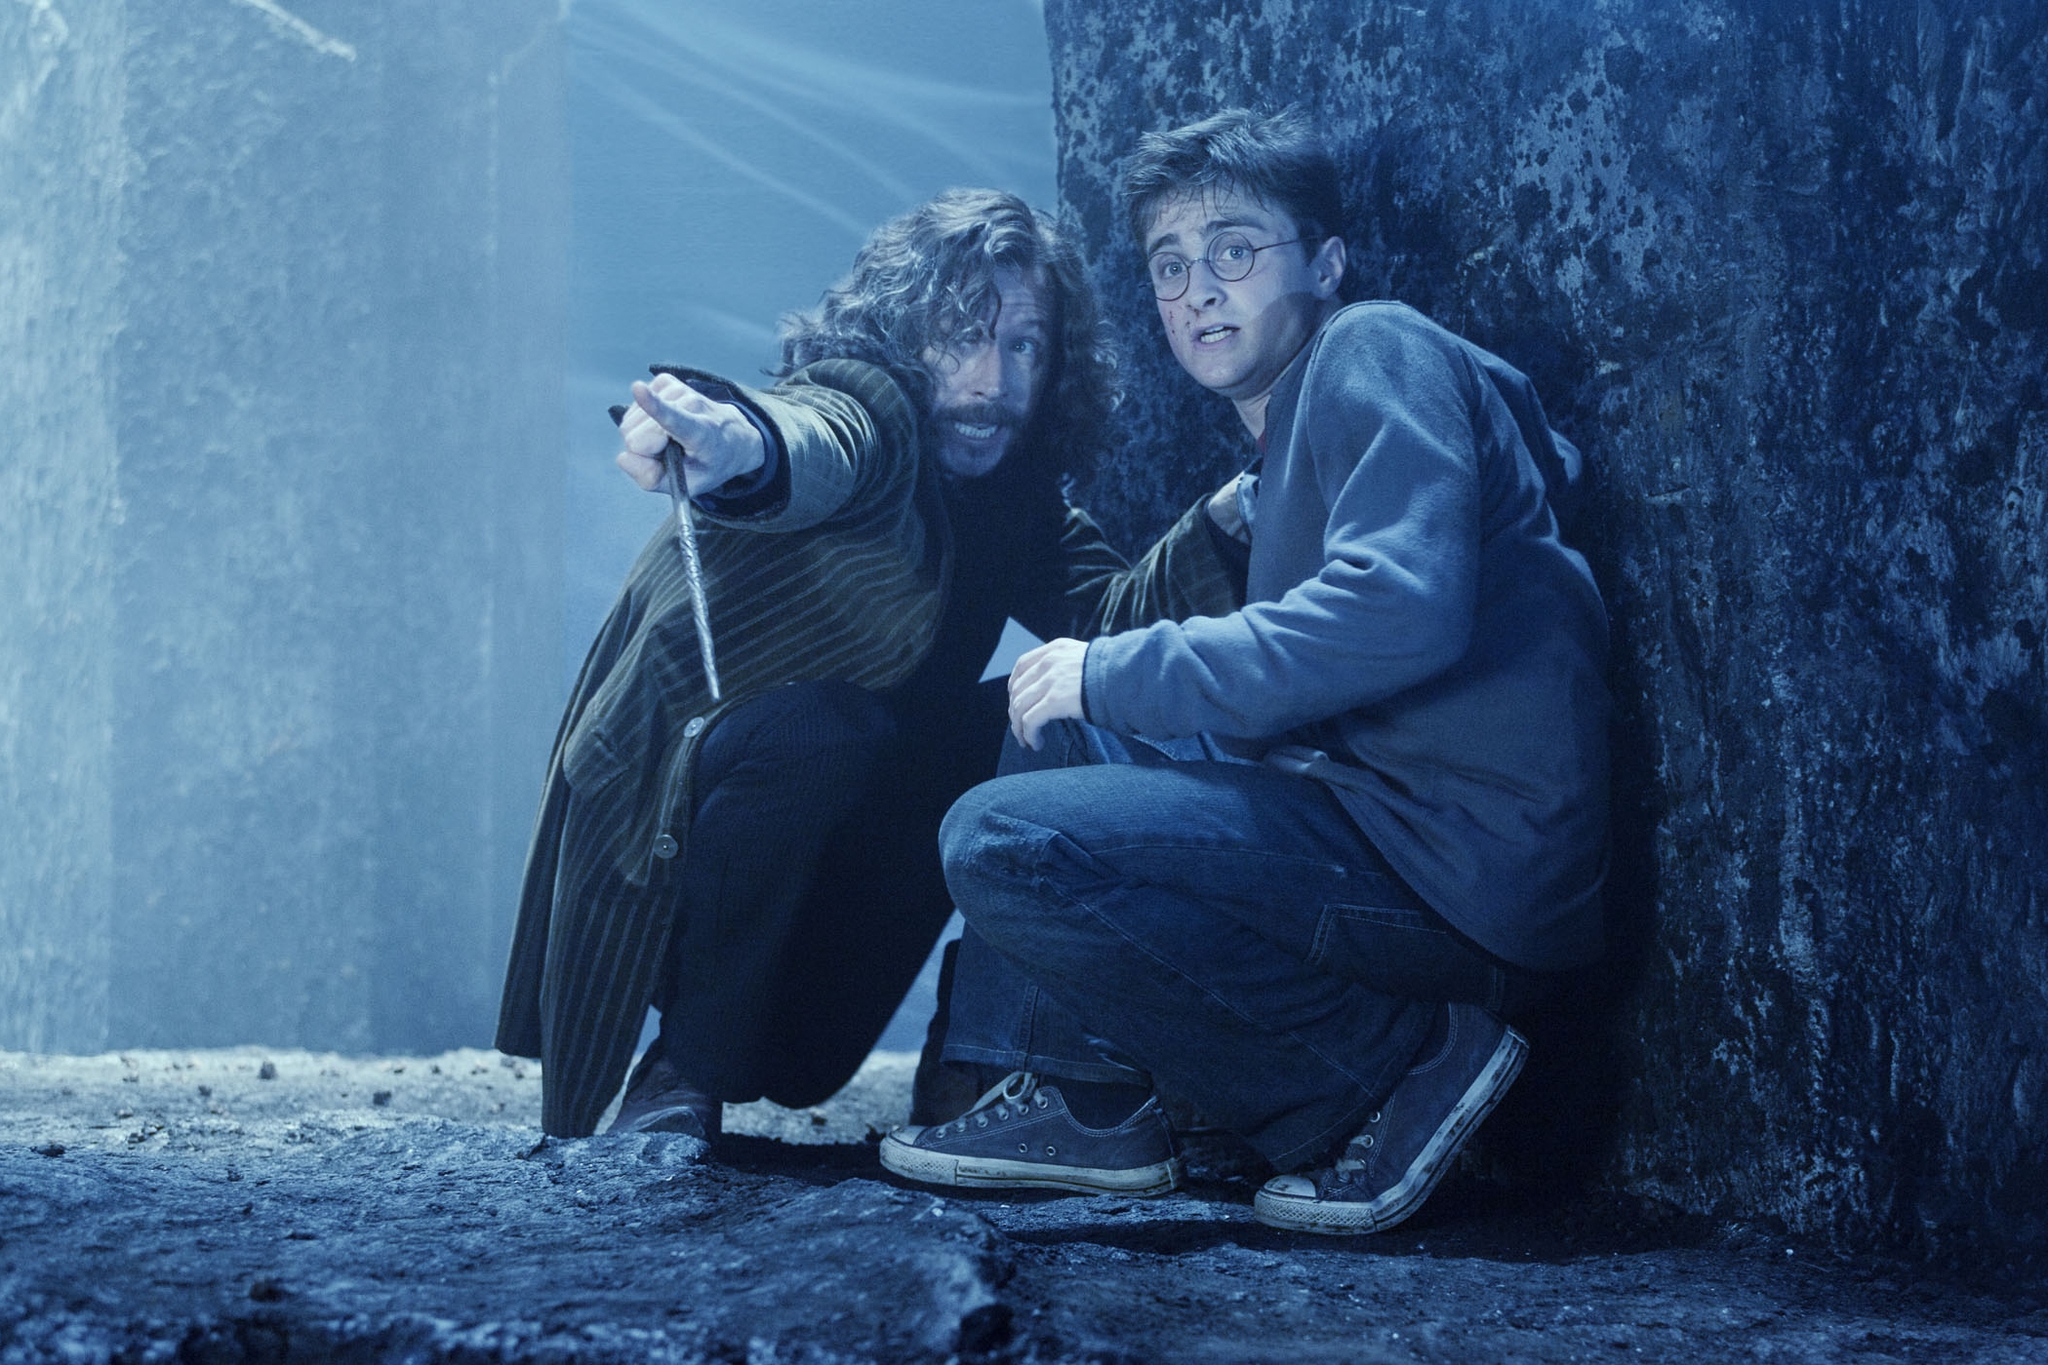 sirius black, movie, harry potter and the order of the phoenix, daniel radcliffe, gary oldman, harry potter